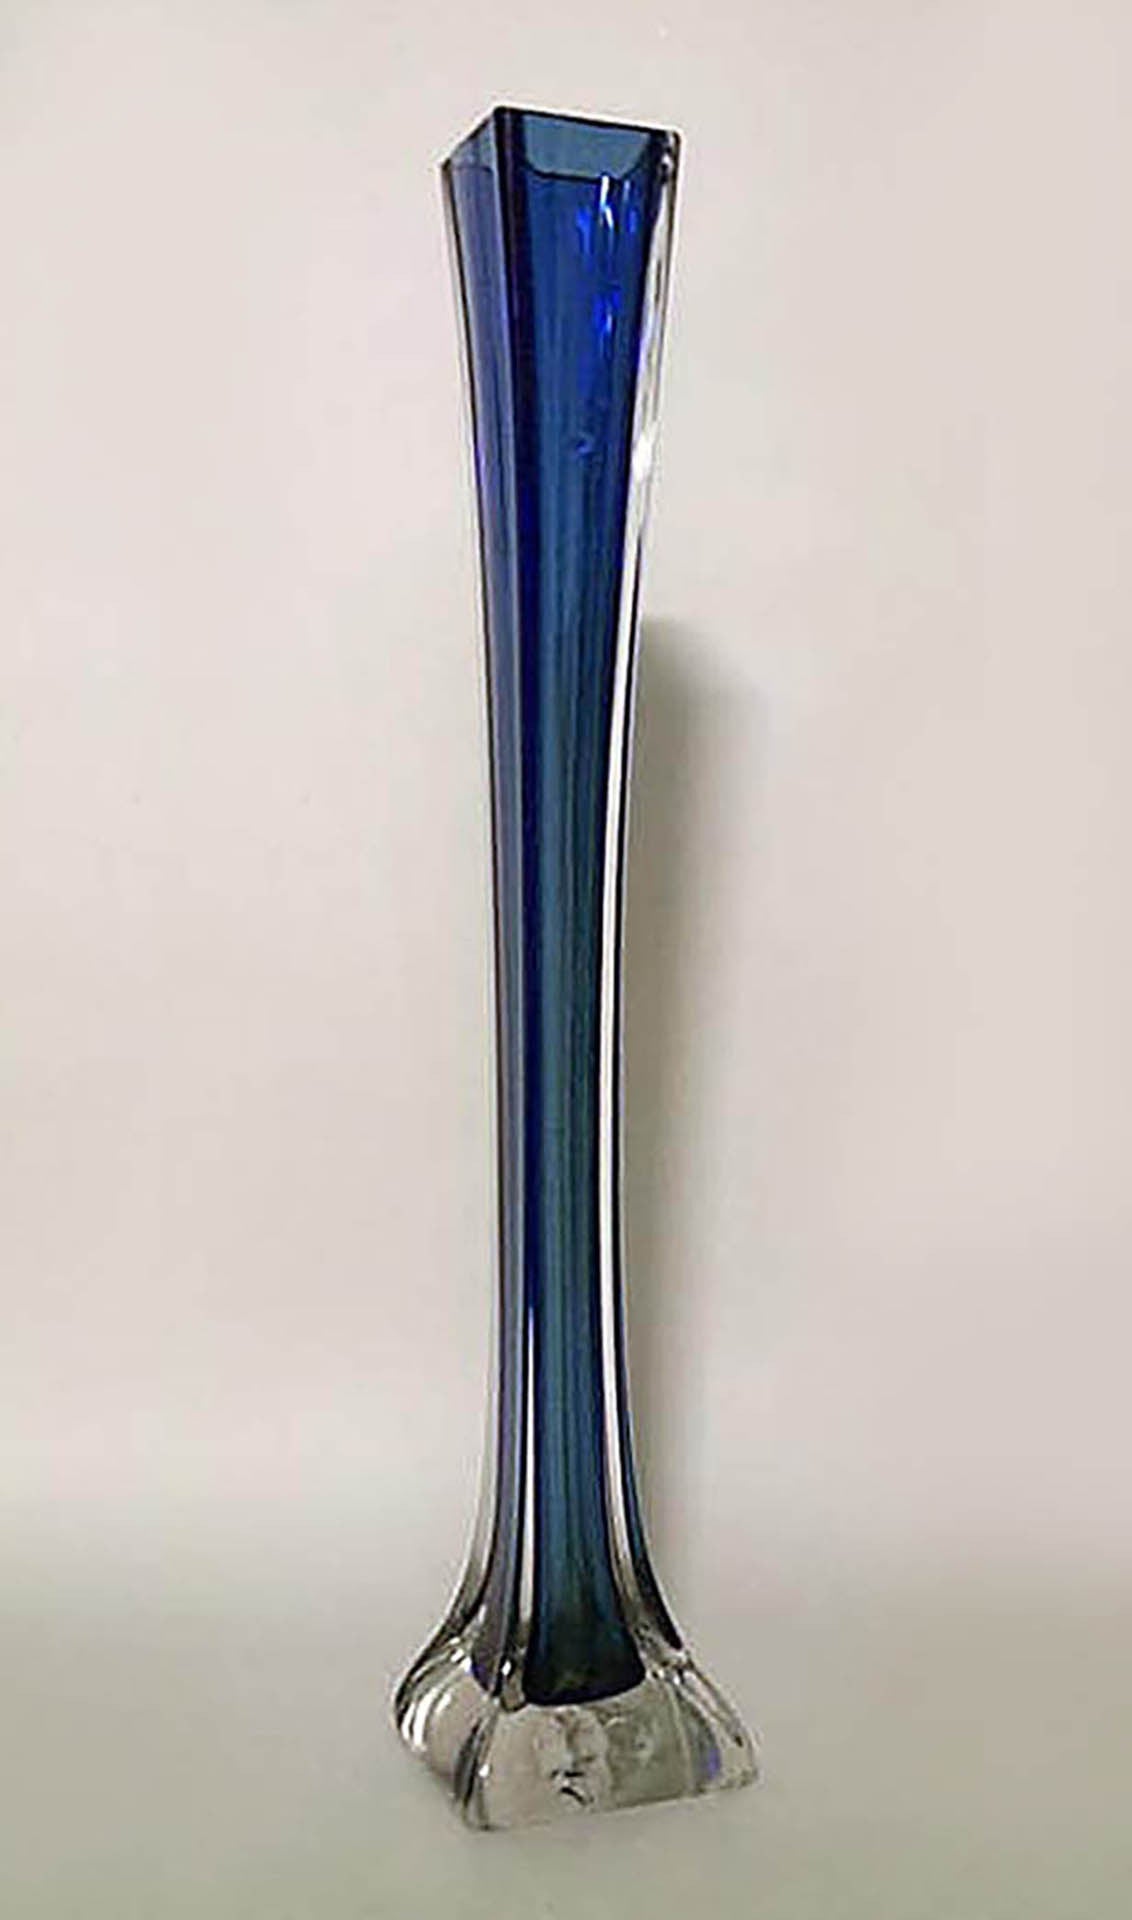 Pair Of American Art Deco Tall Blue Glass Vases At 1stdibs Tall Art Deco Vase